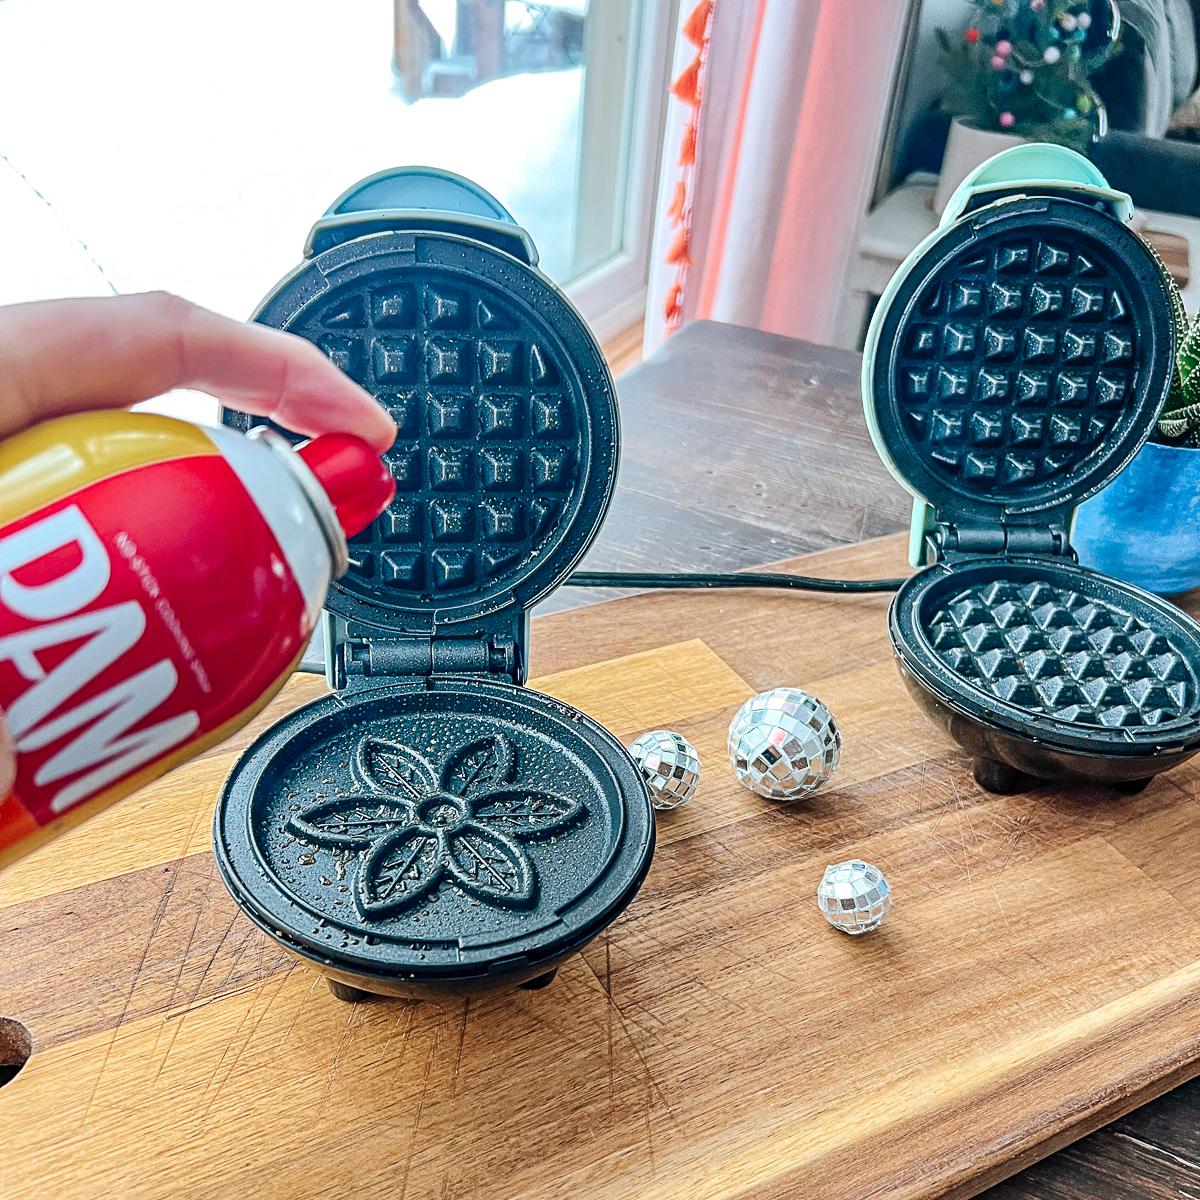 Two Dash Mini Waffle Makers on a wooden cutting board with disco balls between them. Hand holding can of Pam nonstick cooking spray.